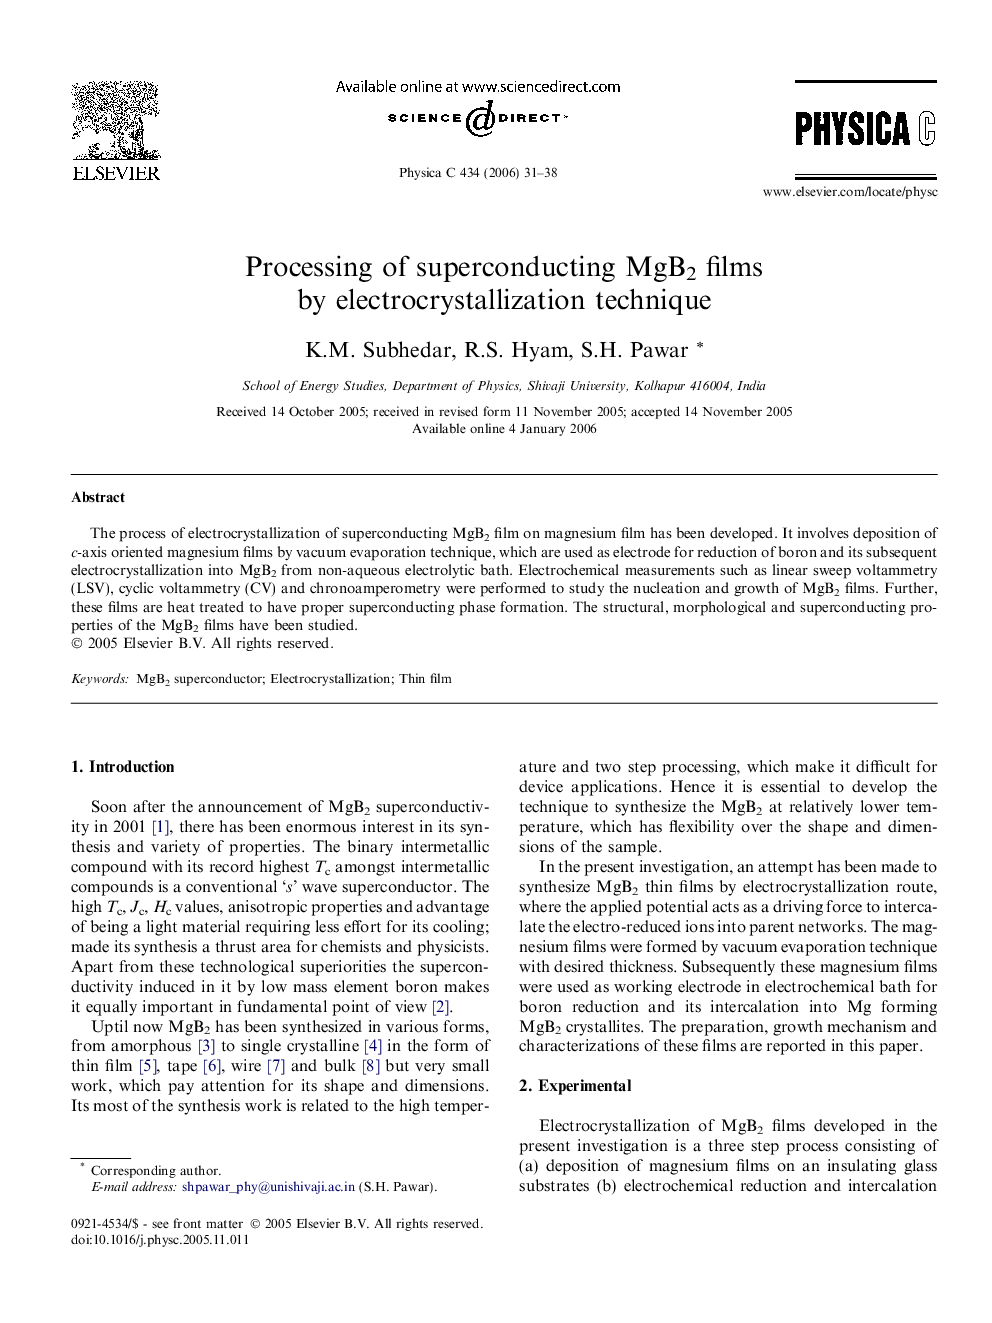 Processing of superconducting MgB2 films by electrocrystallization technique